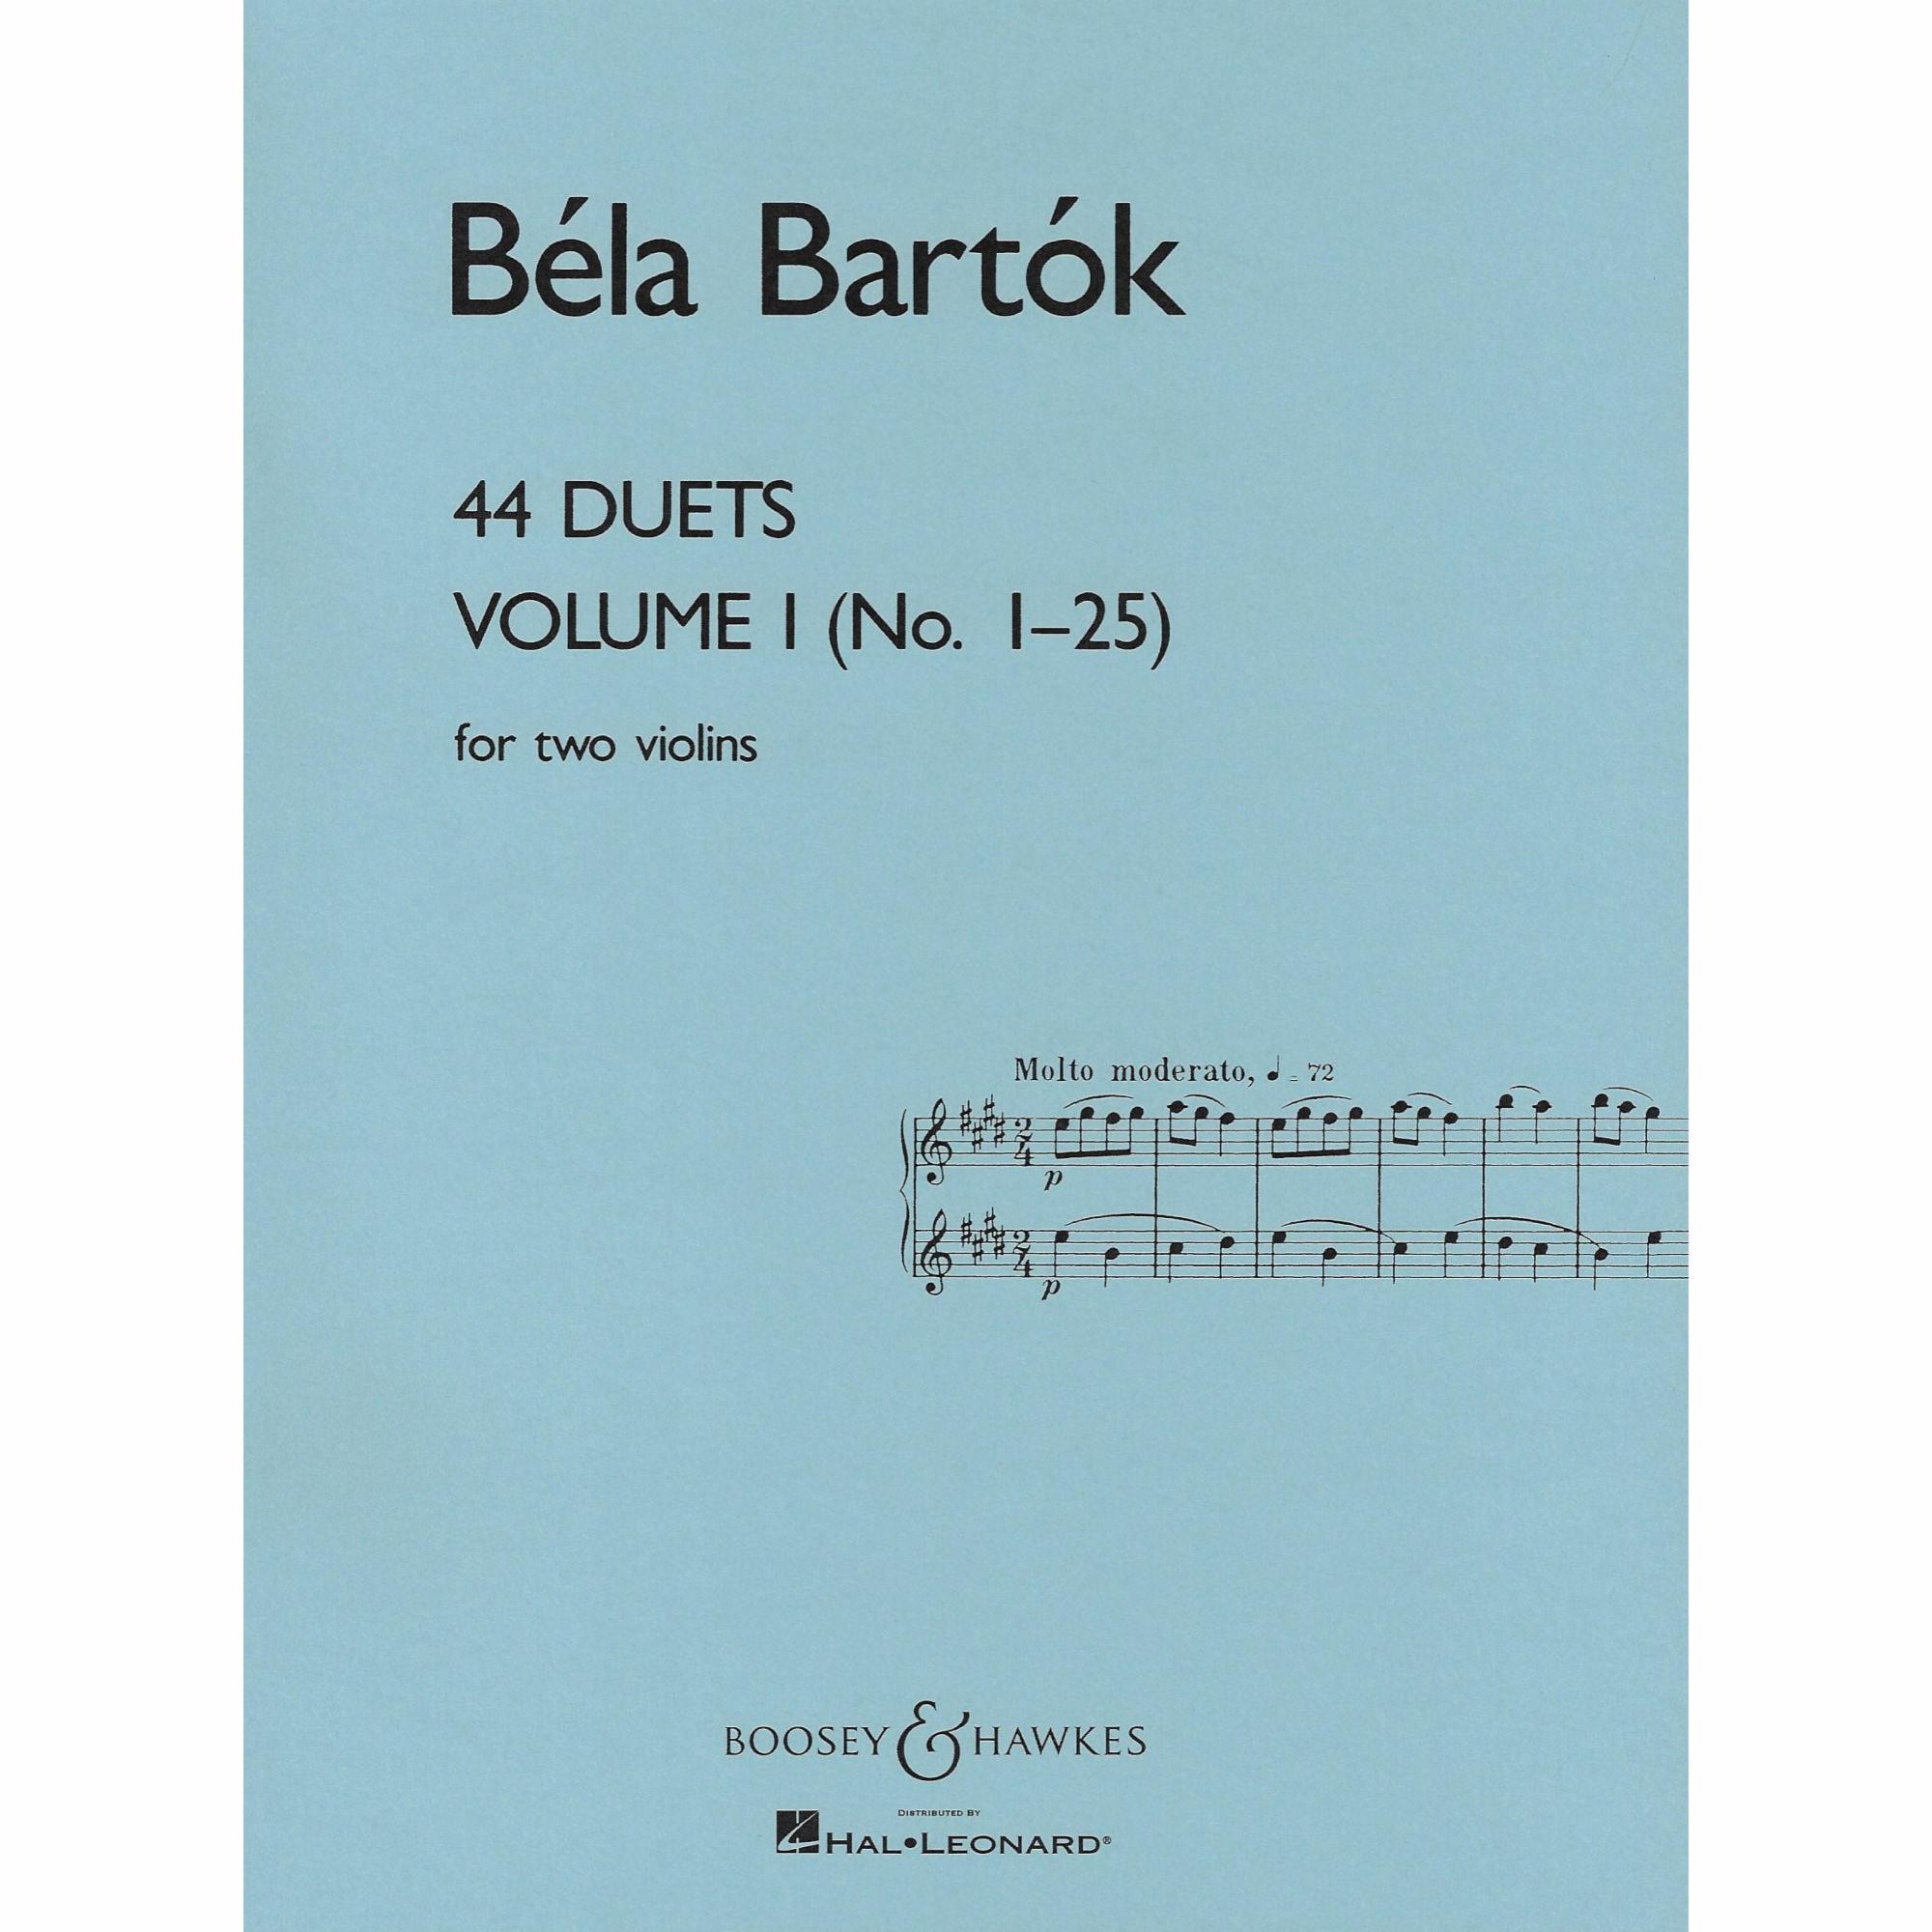 Bartok -- 44 Duets, Volumes I & II for Two Violins